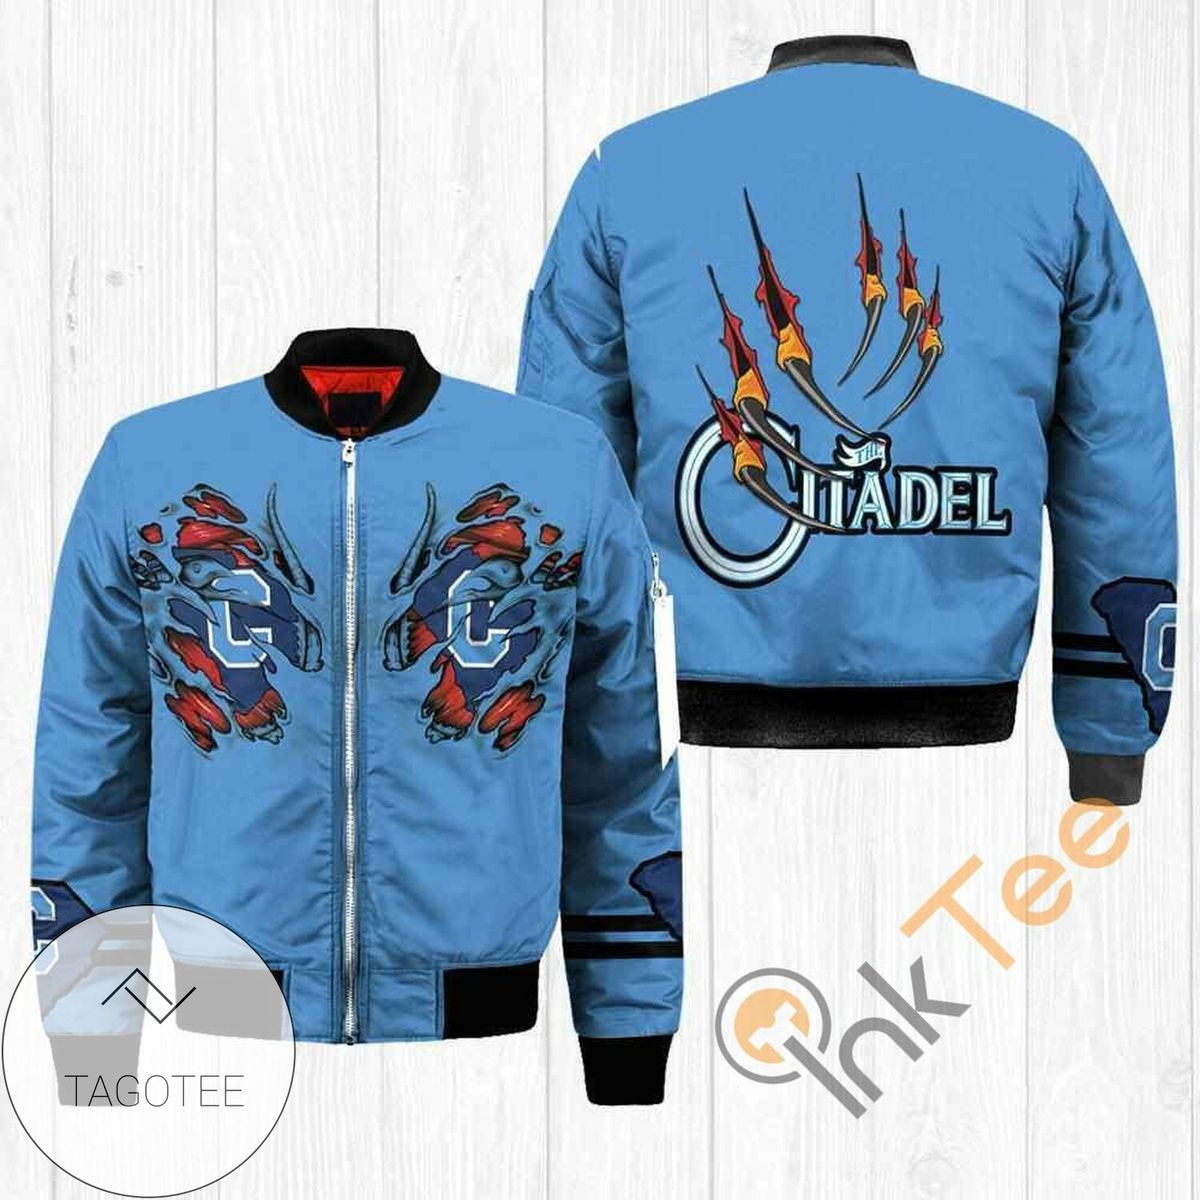 Citadel Bulldogs NCAA Claws Apparel Best Christmas Gift For Fans Bomber Jacket